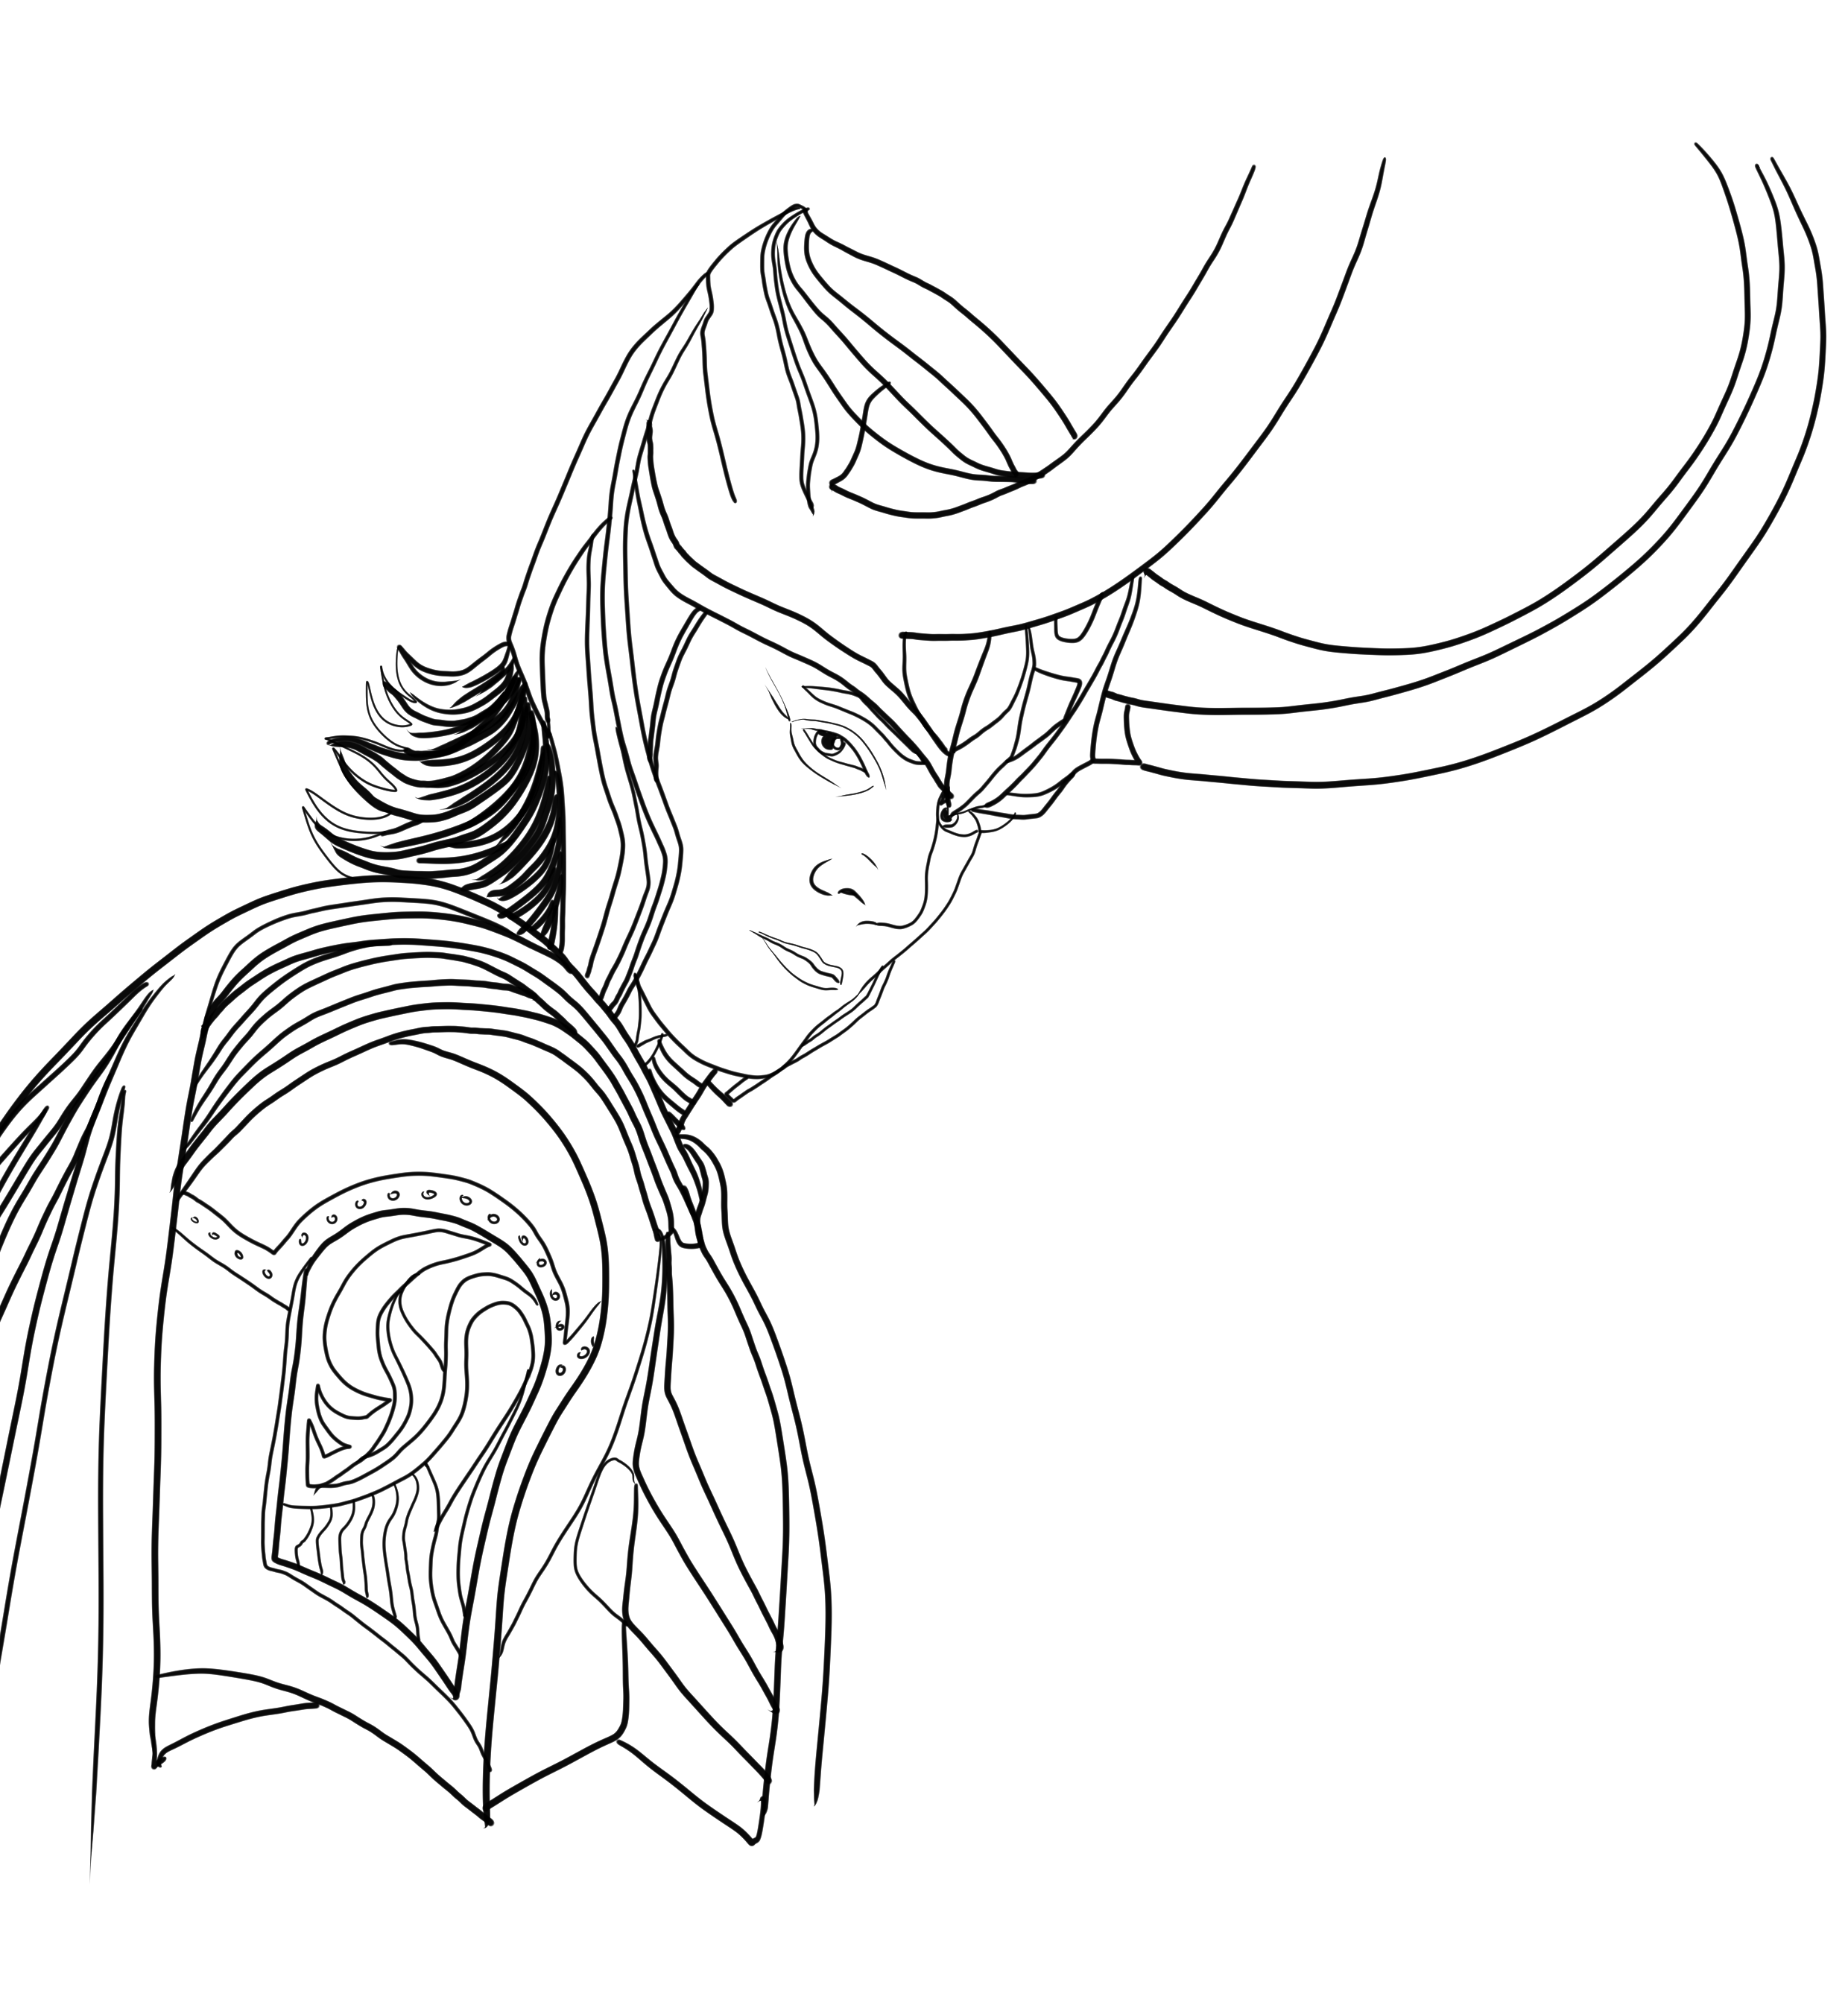 Loki 04 from Loki coloring page to print and coloring